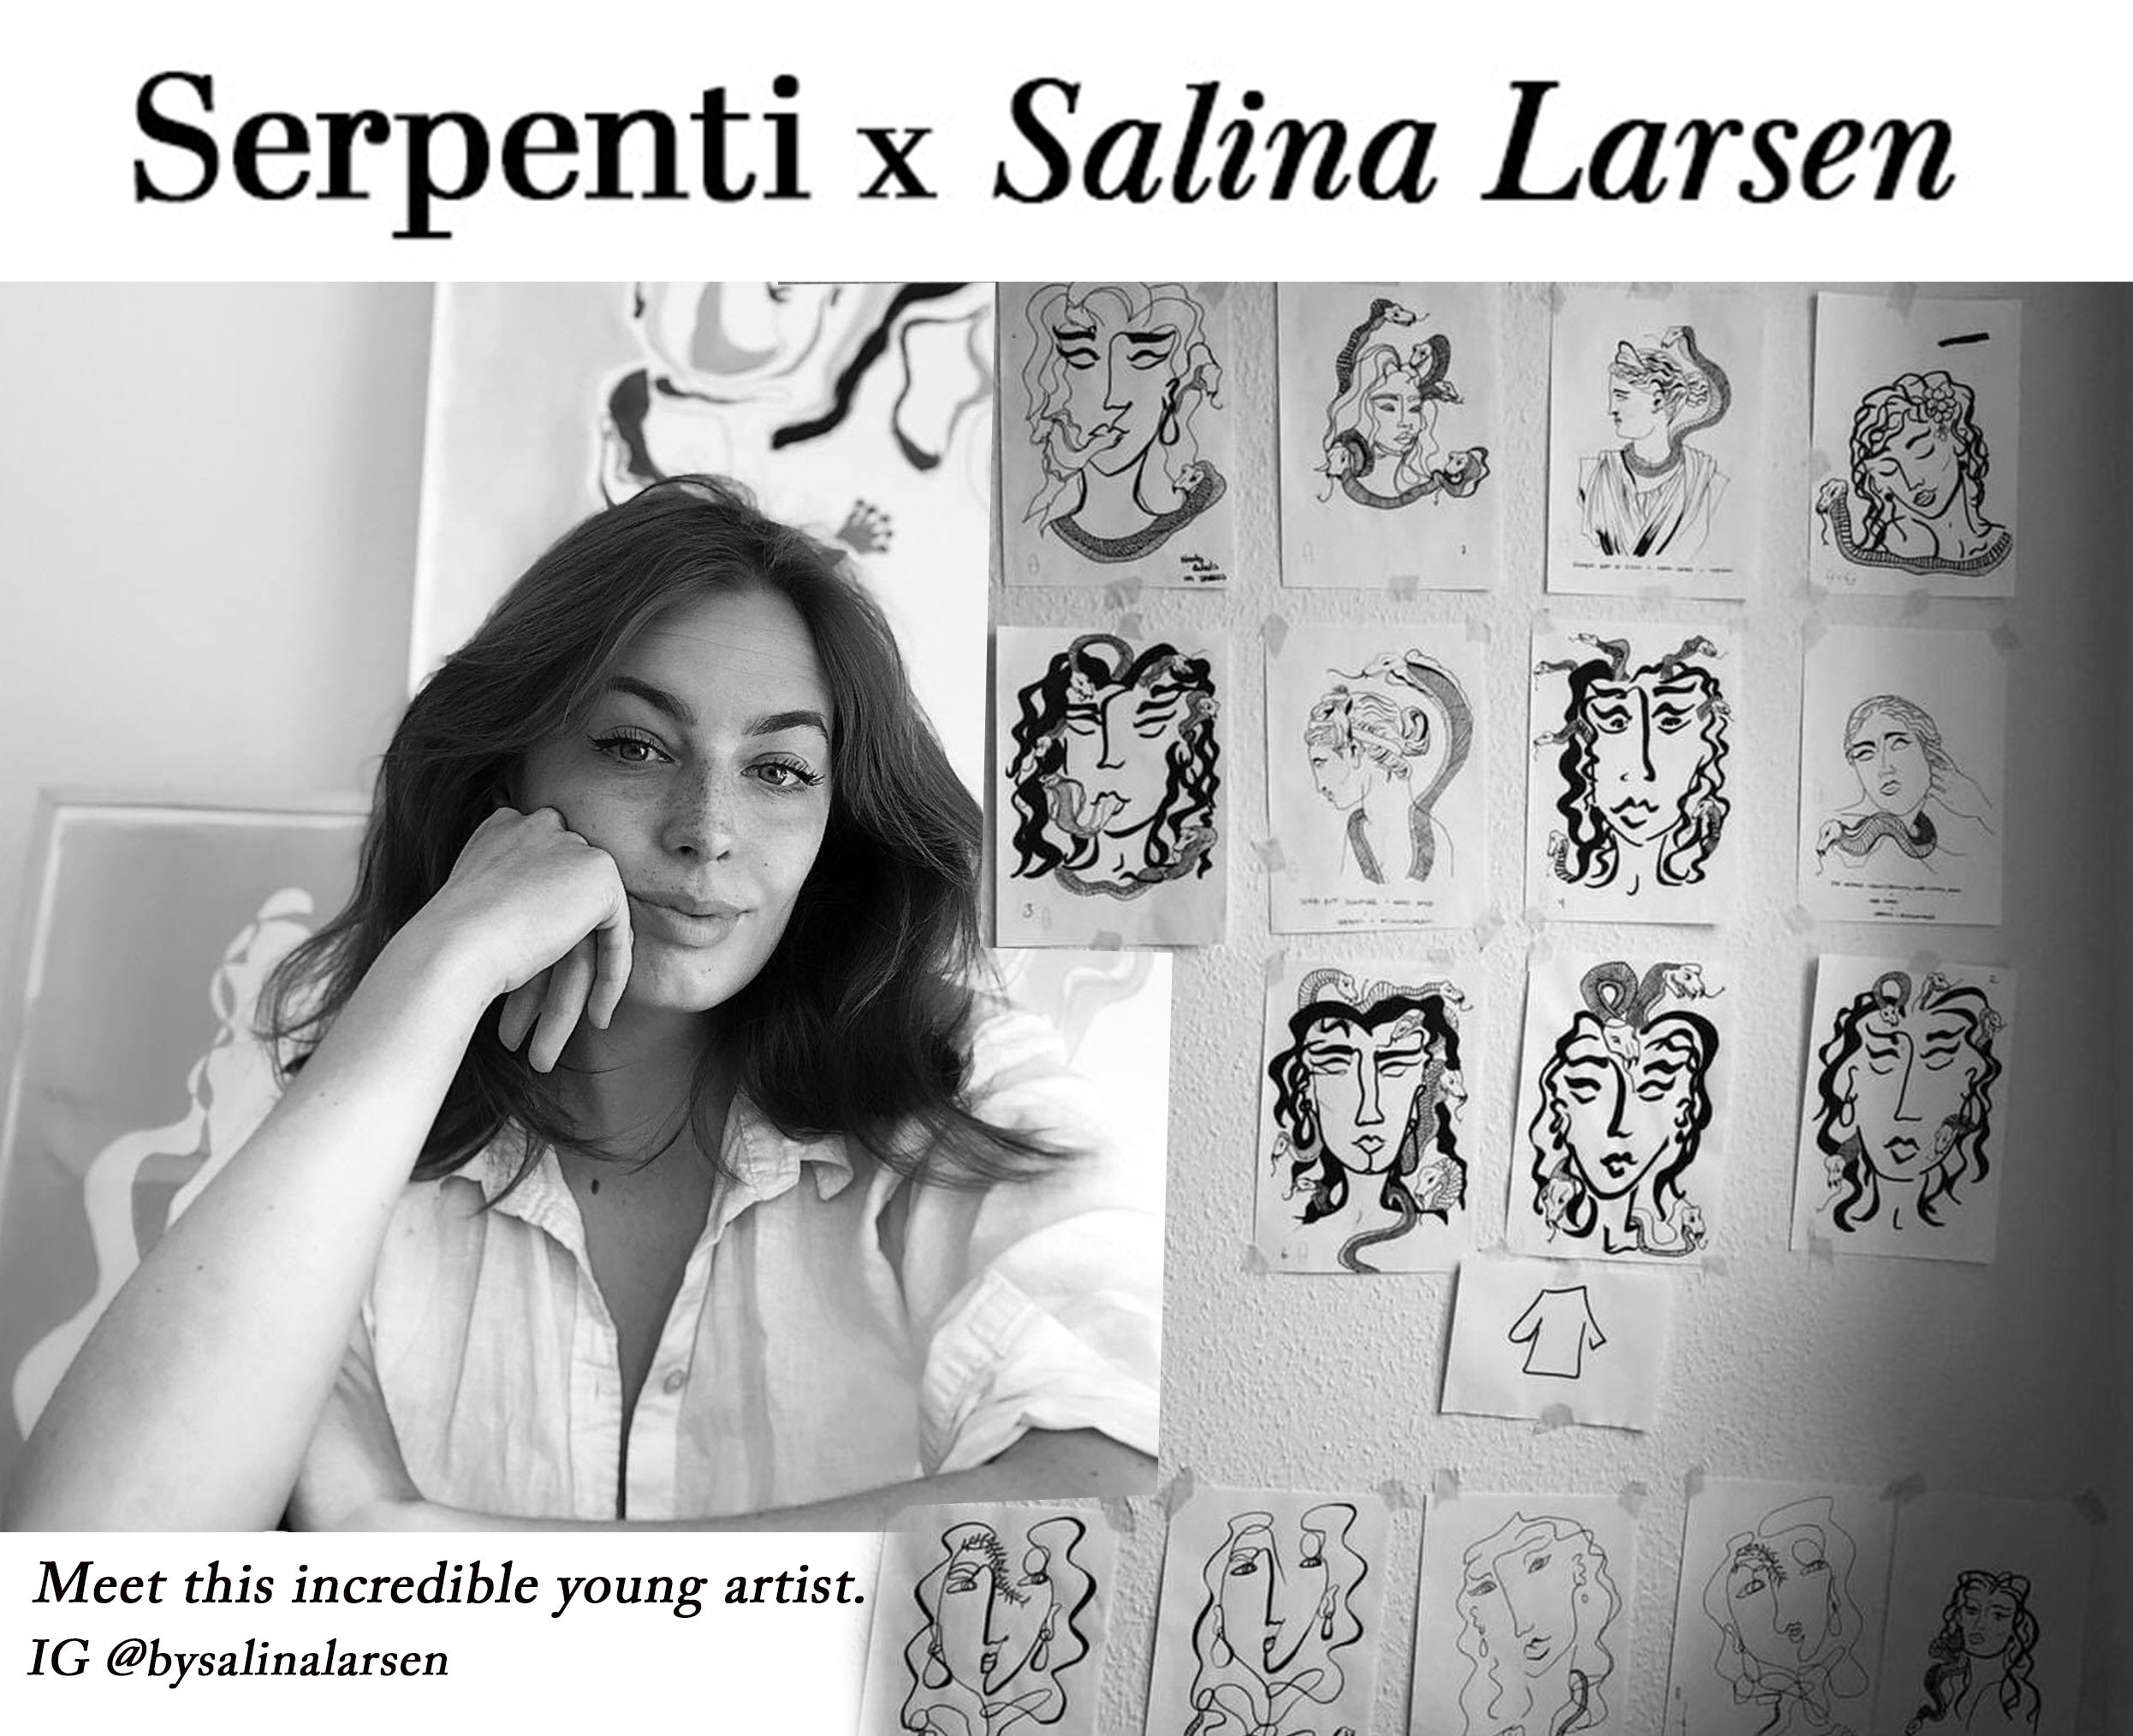 Salina Larsen poses in front of some of her artwork